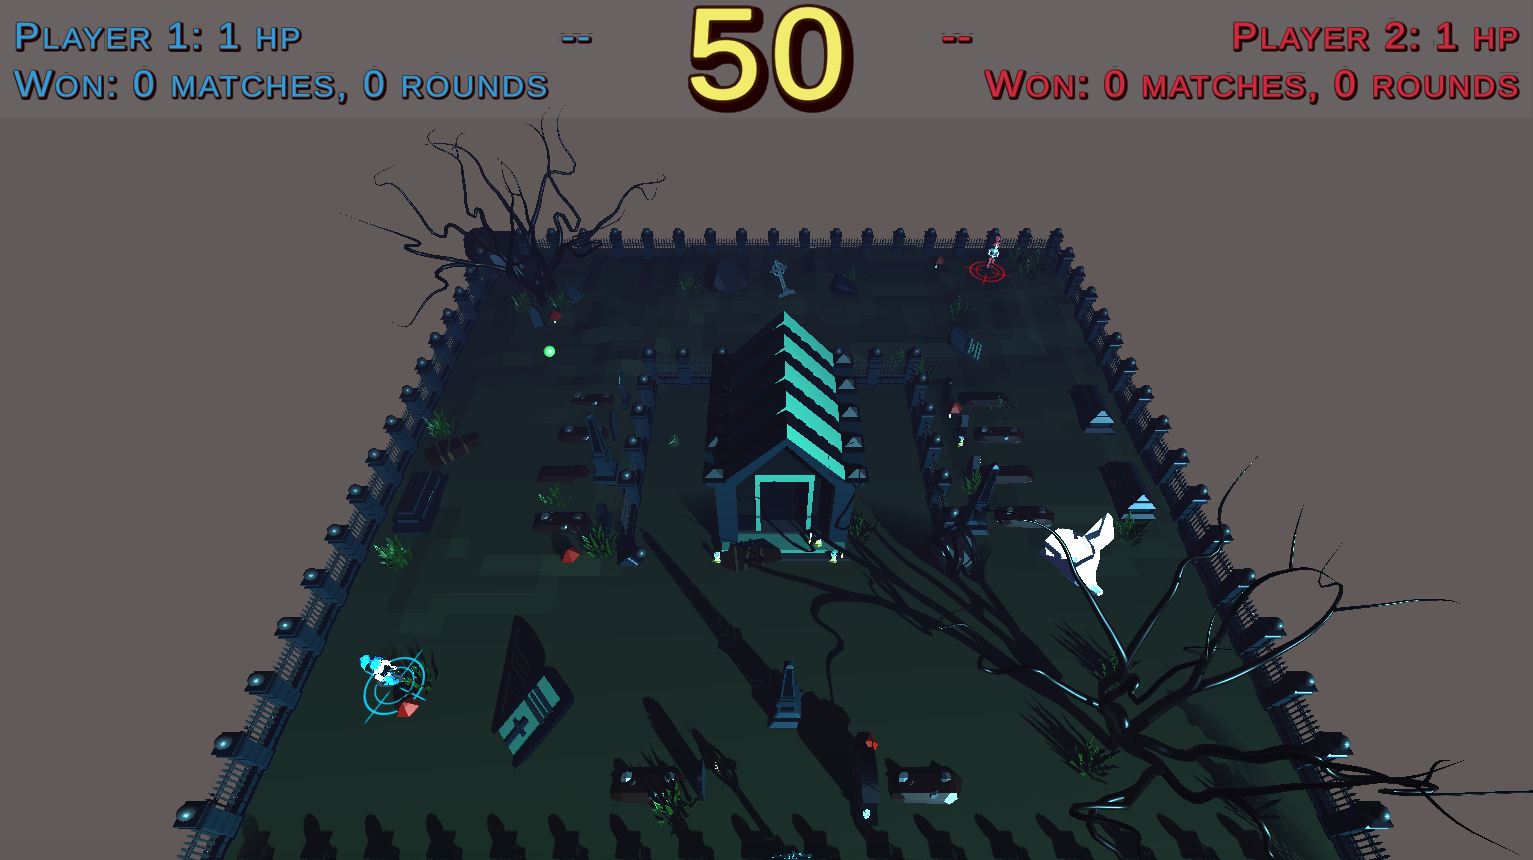 A view of the graveyard level at the end of the second preproduction phase